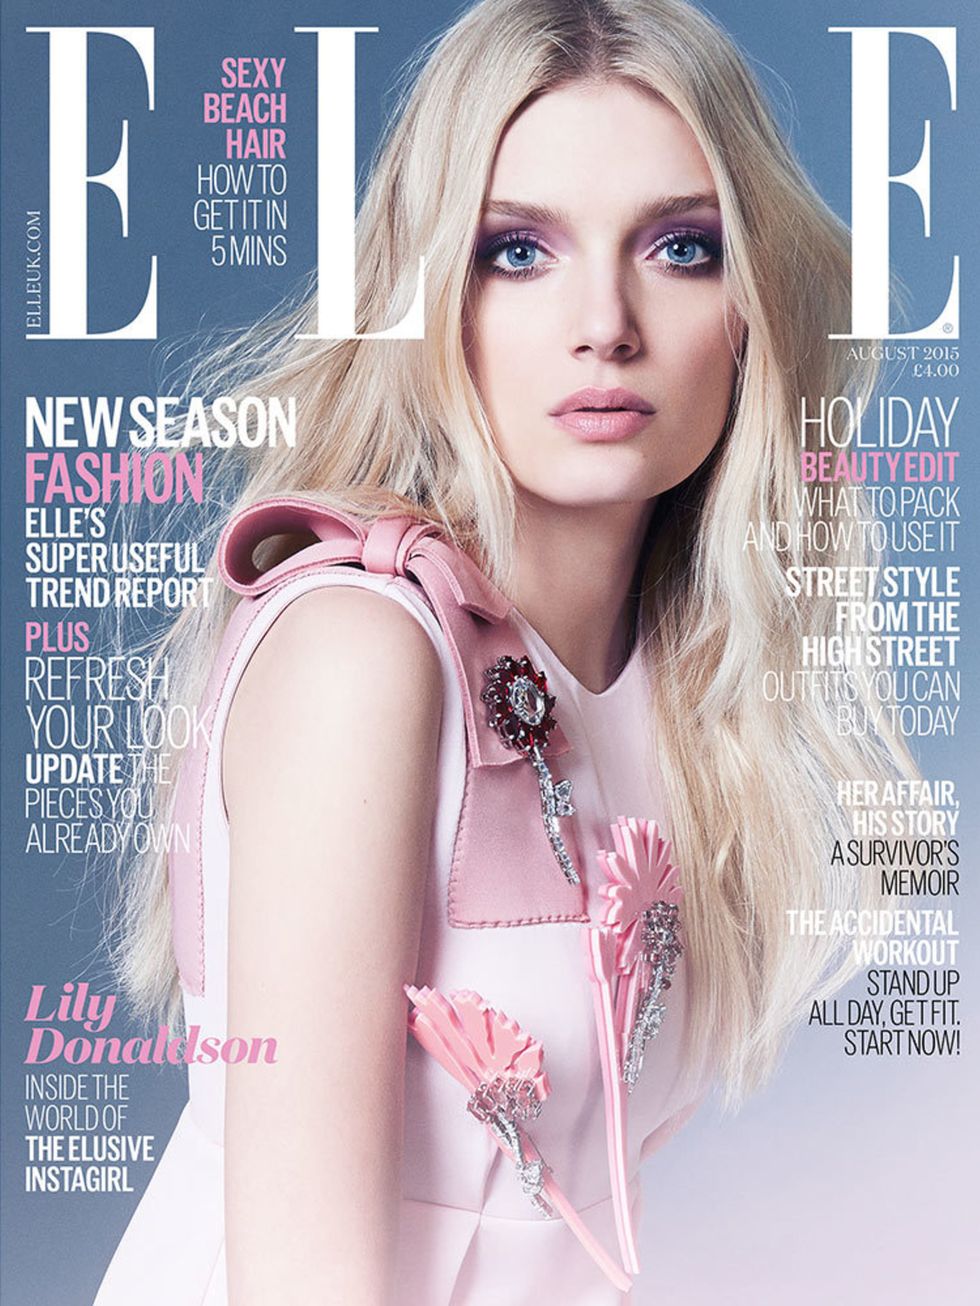 <p>Lily Donaldson on the cover of <a href="http://www.elleuk.com/now-trending/model-lily-donaldson-august-2015-british-elle-magazine-cover">ELLE&#39;s August Issue 2015</a></p>